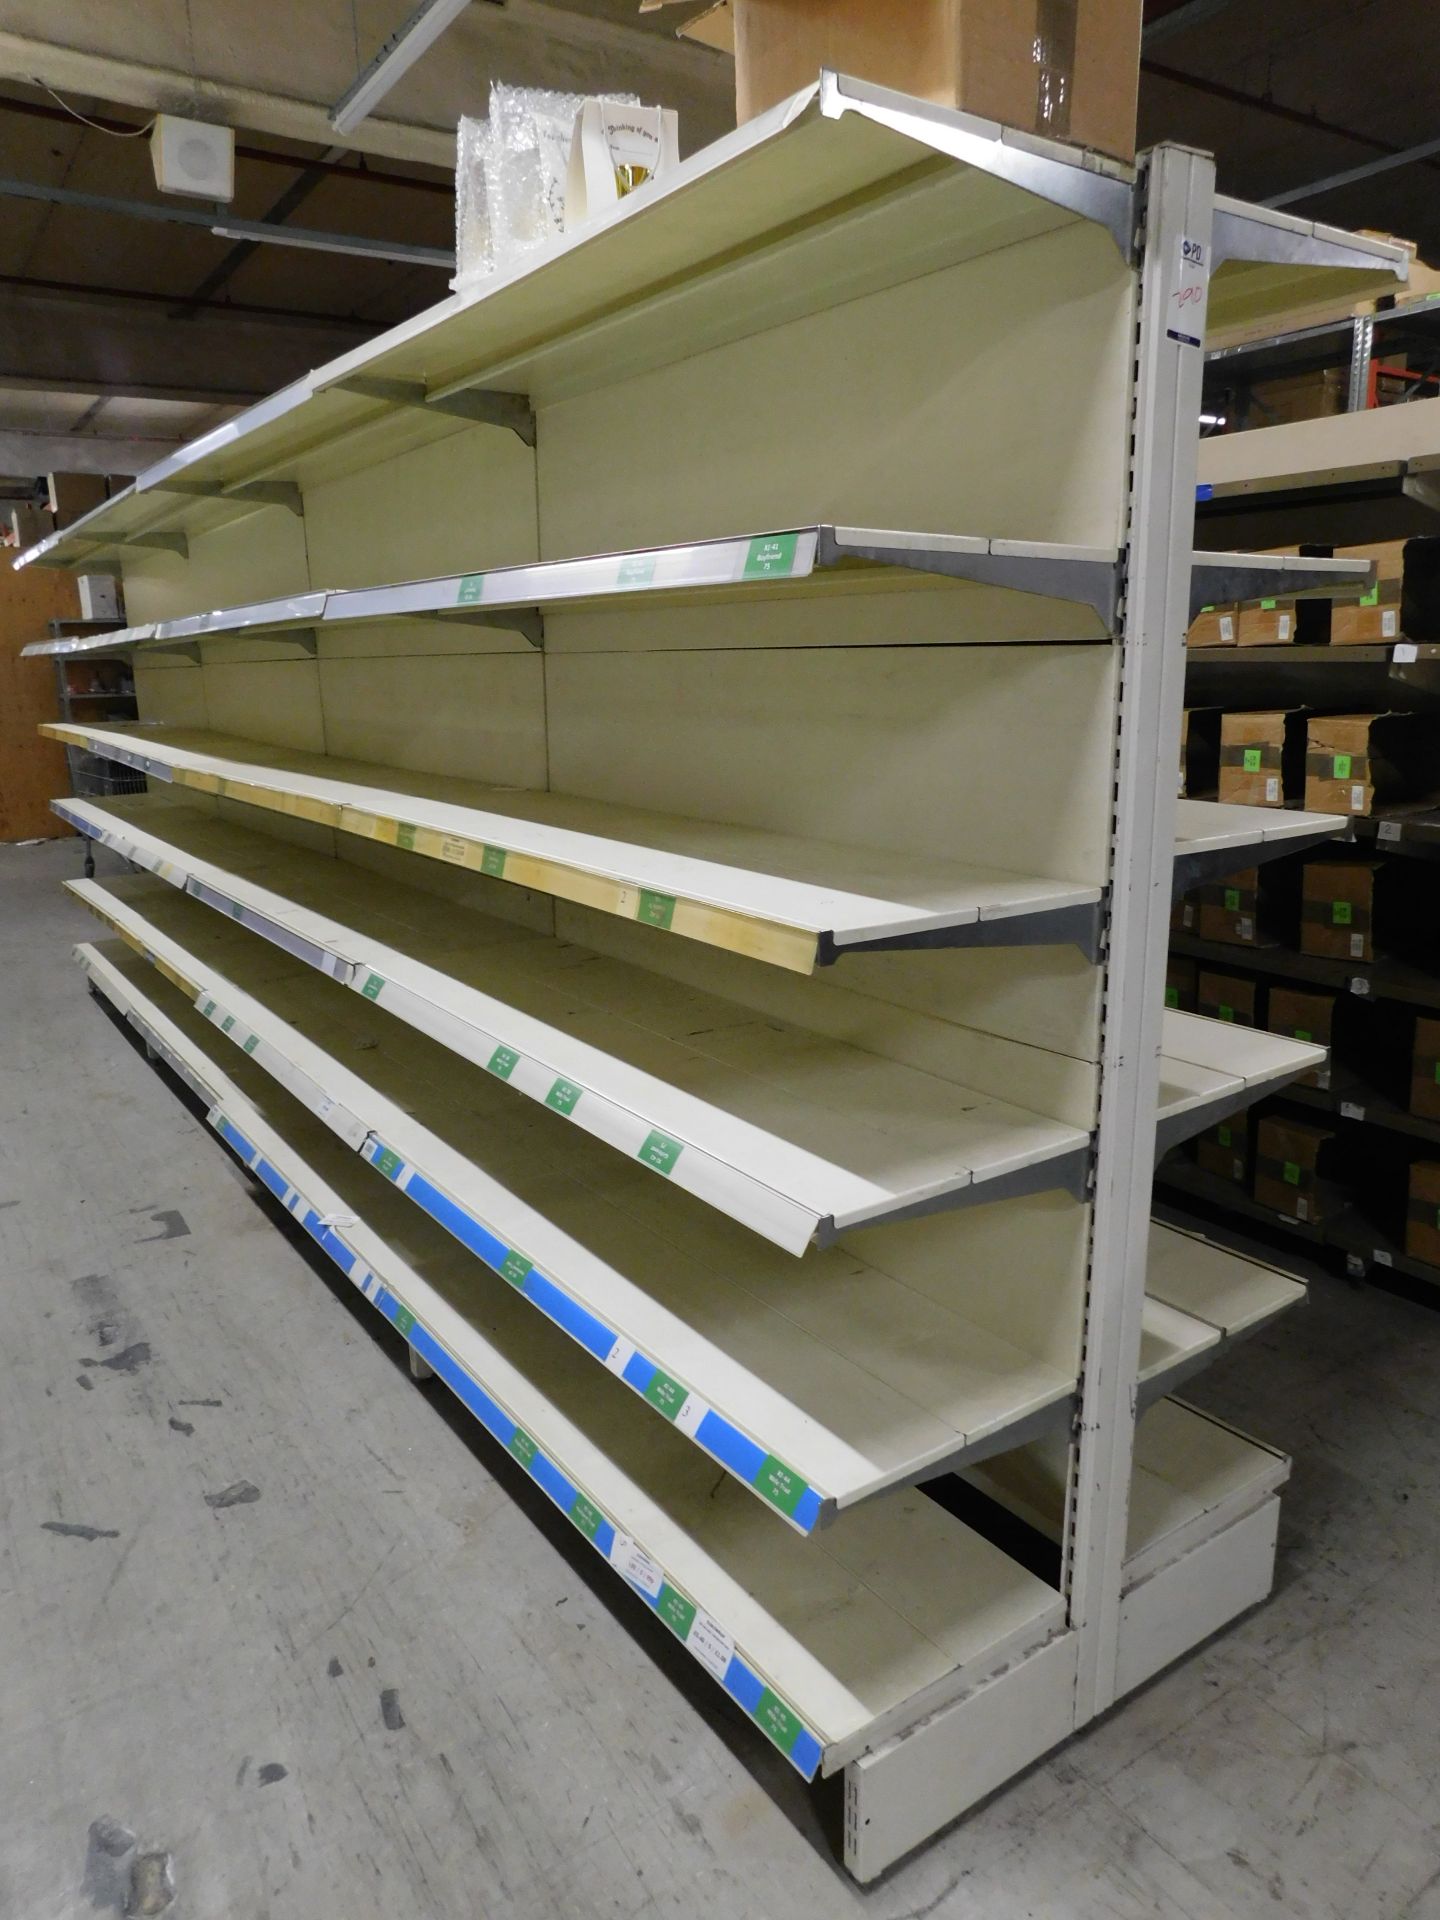 18 Bays of Gondola Double Sided Steel Shelving (Excluding Contents) & Quantity of Shelving